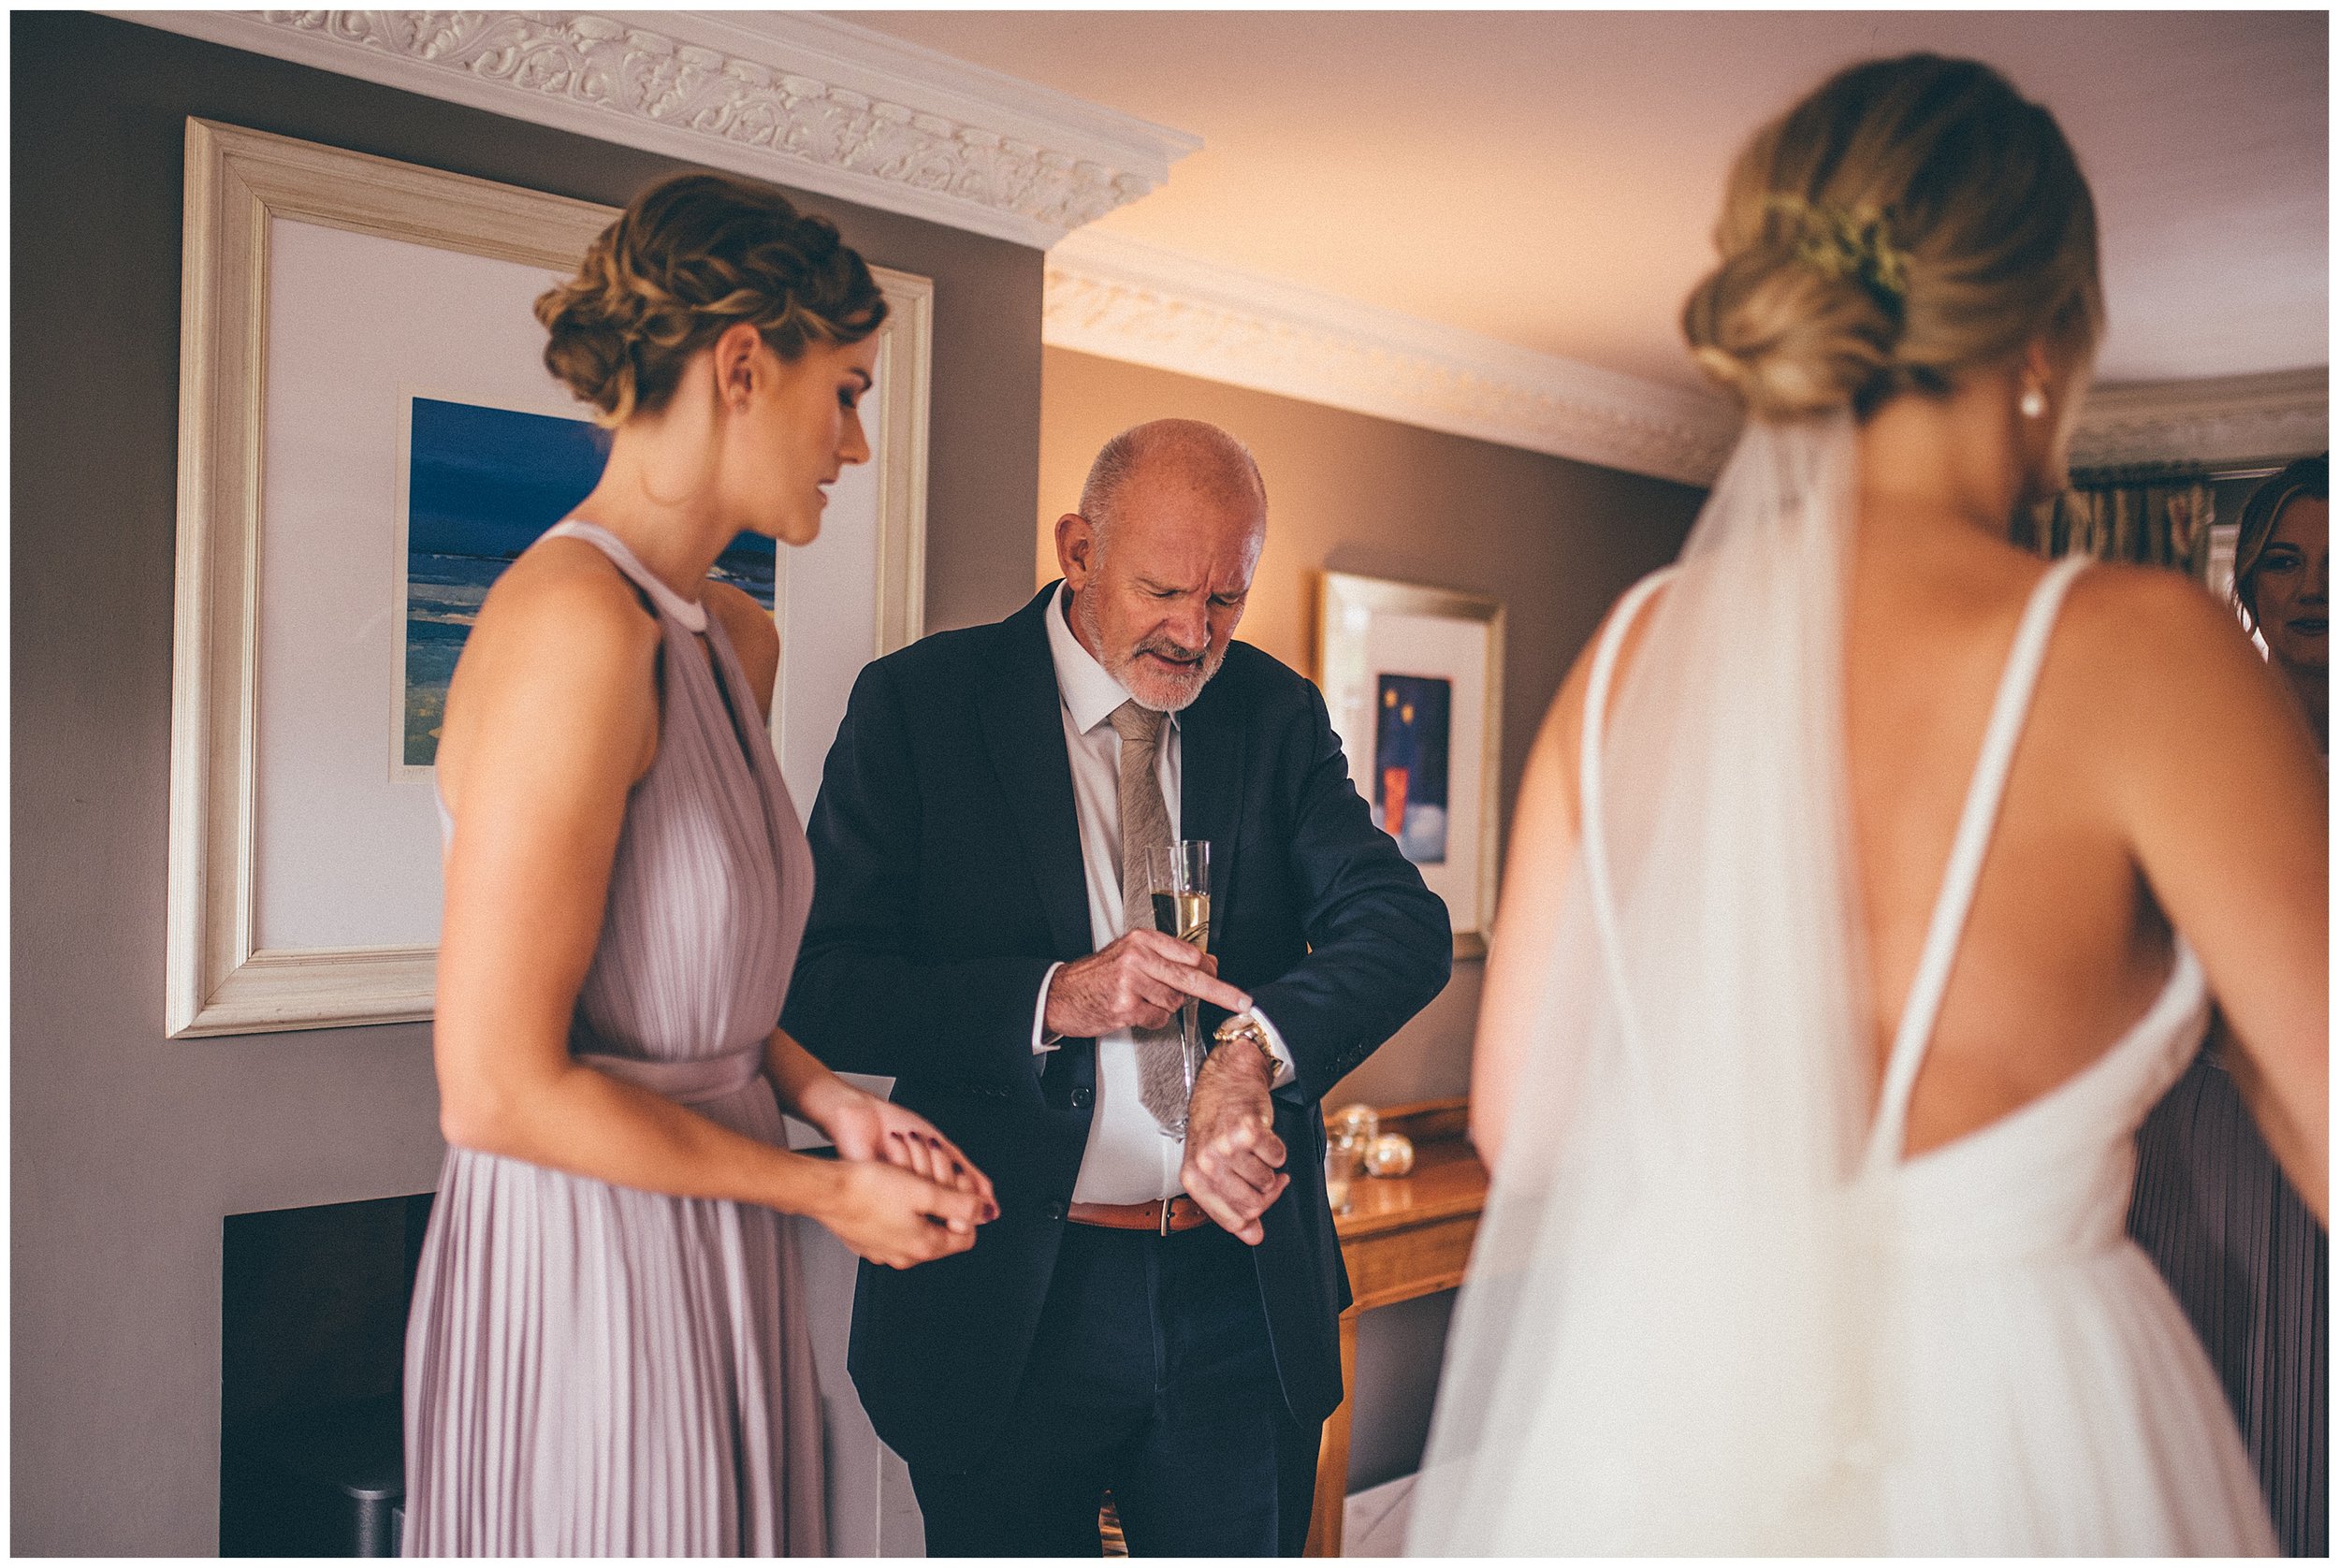 Bride's dad checks his watch ahead of the Cheshire wedding